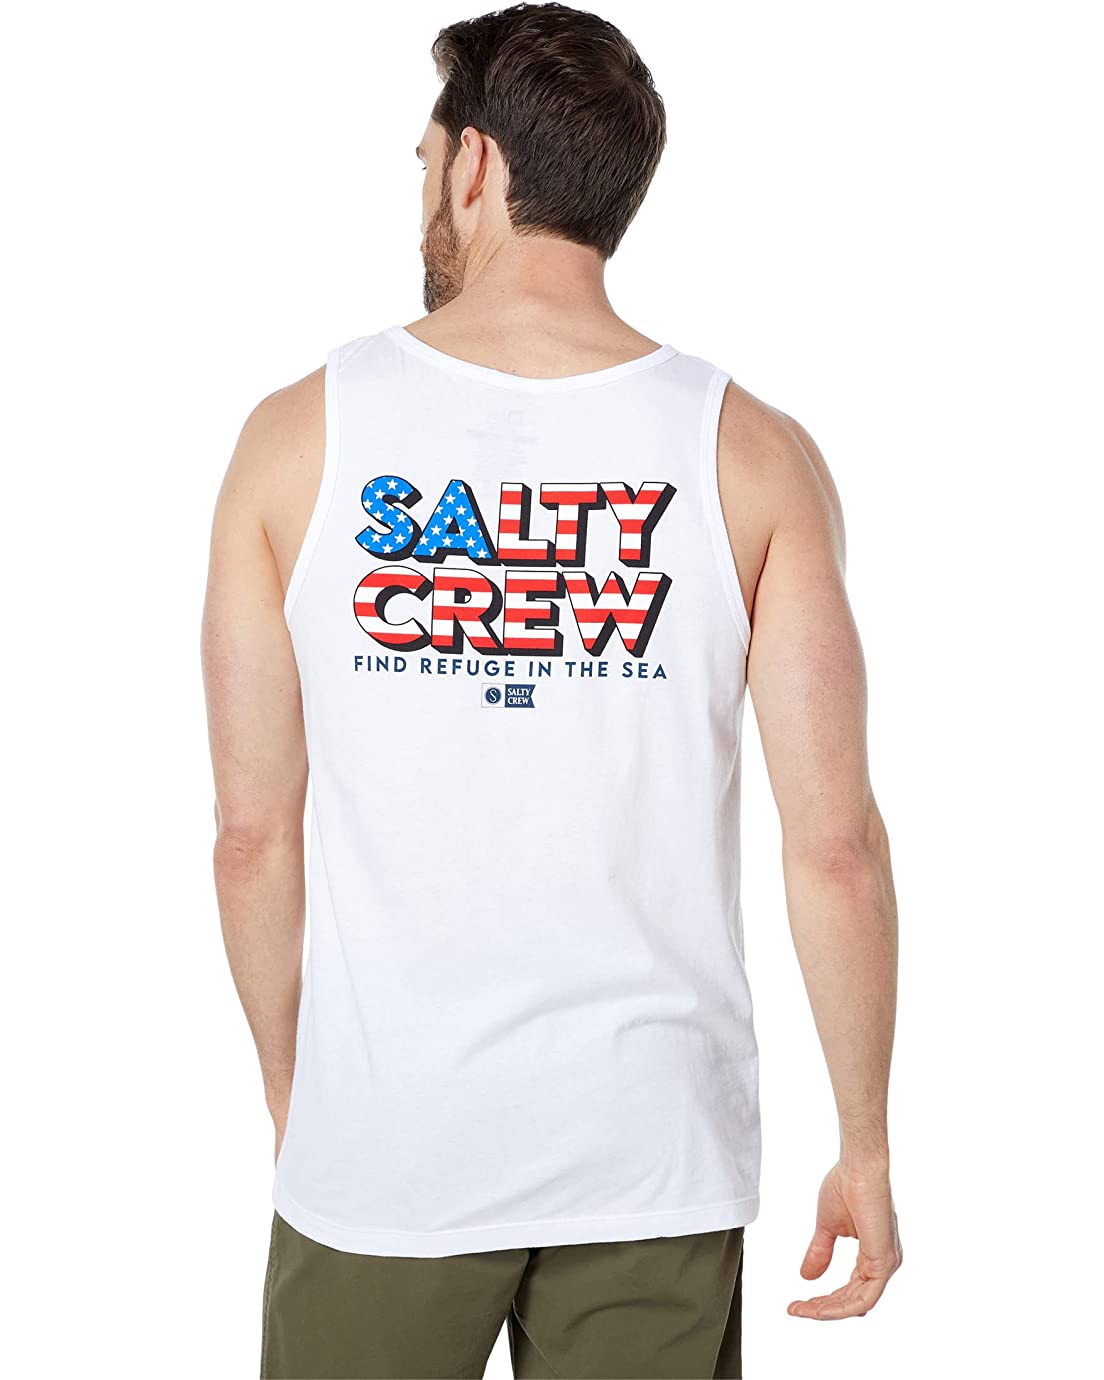 Salty Crew Stars and Stripes Mens Tank White S